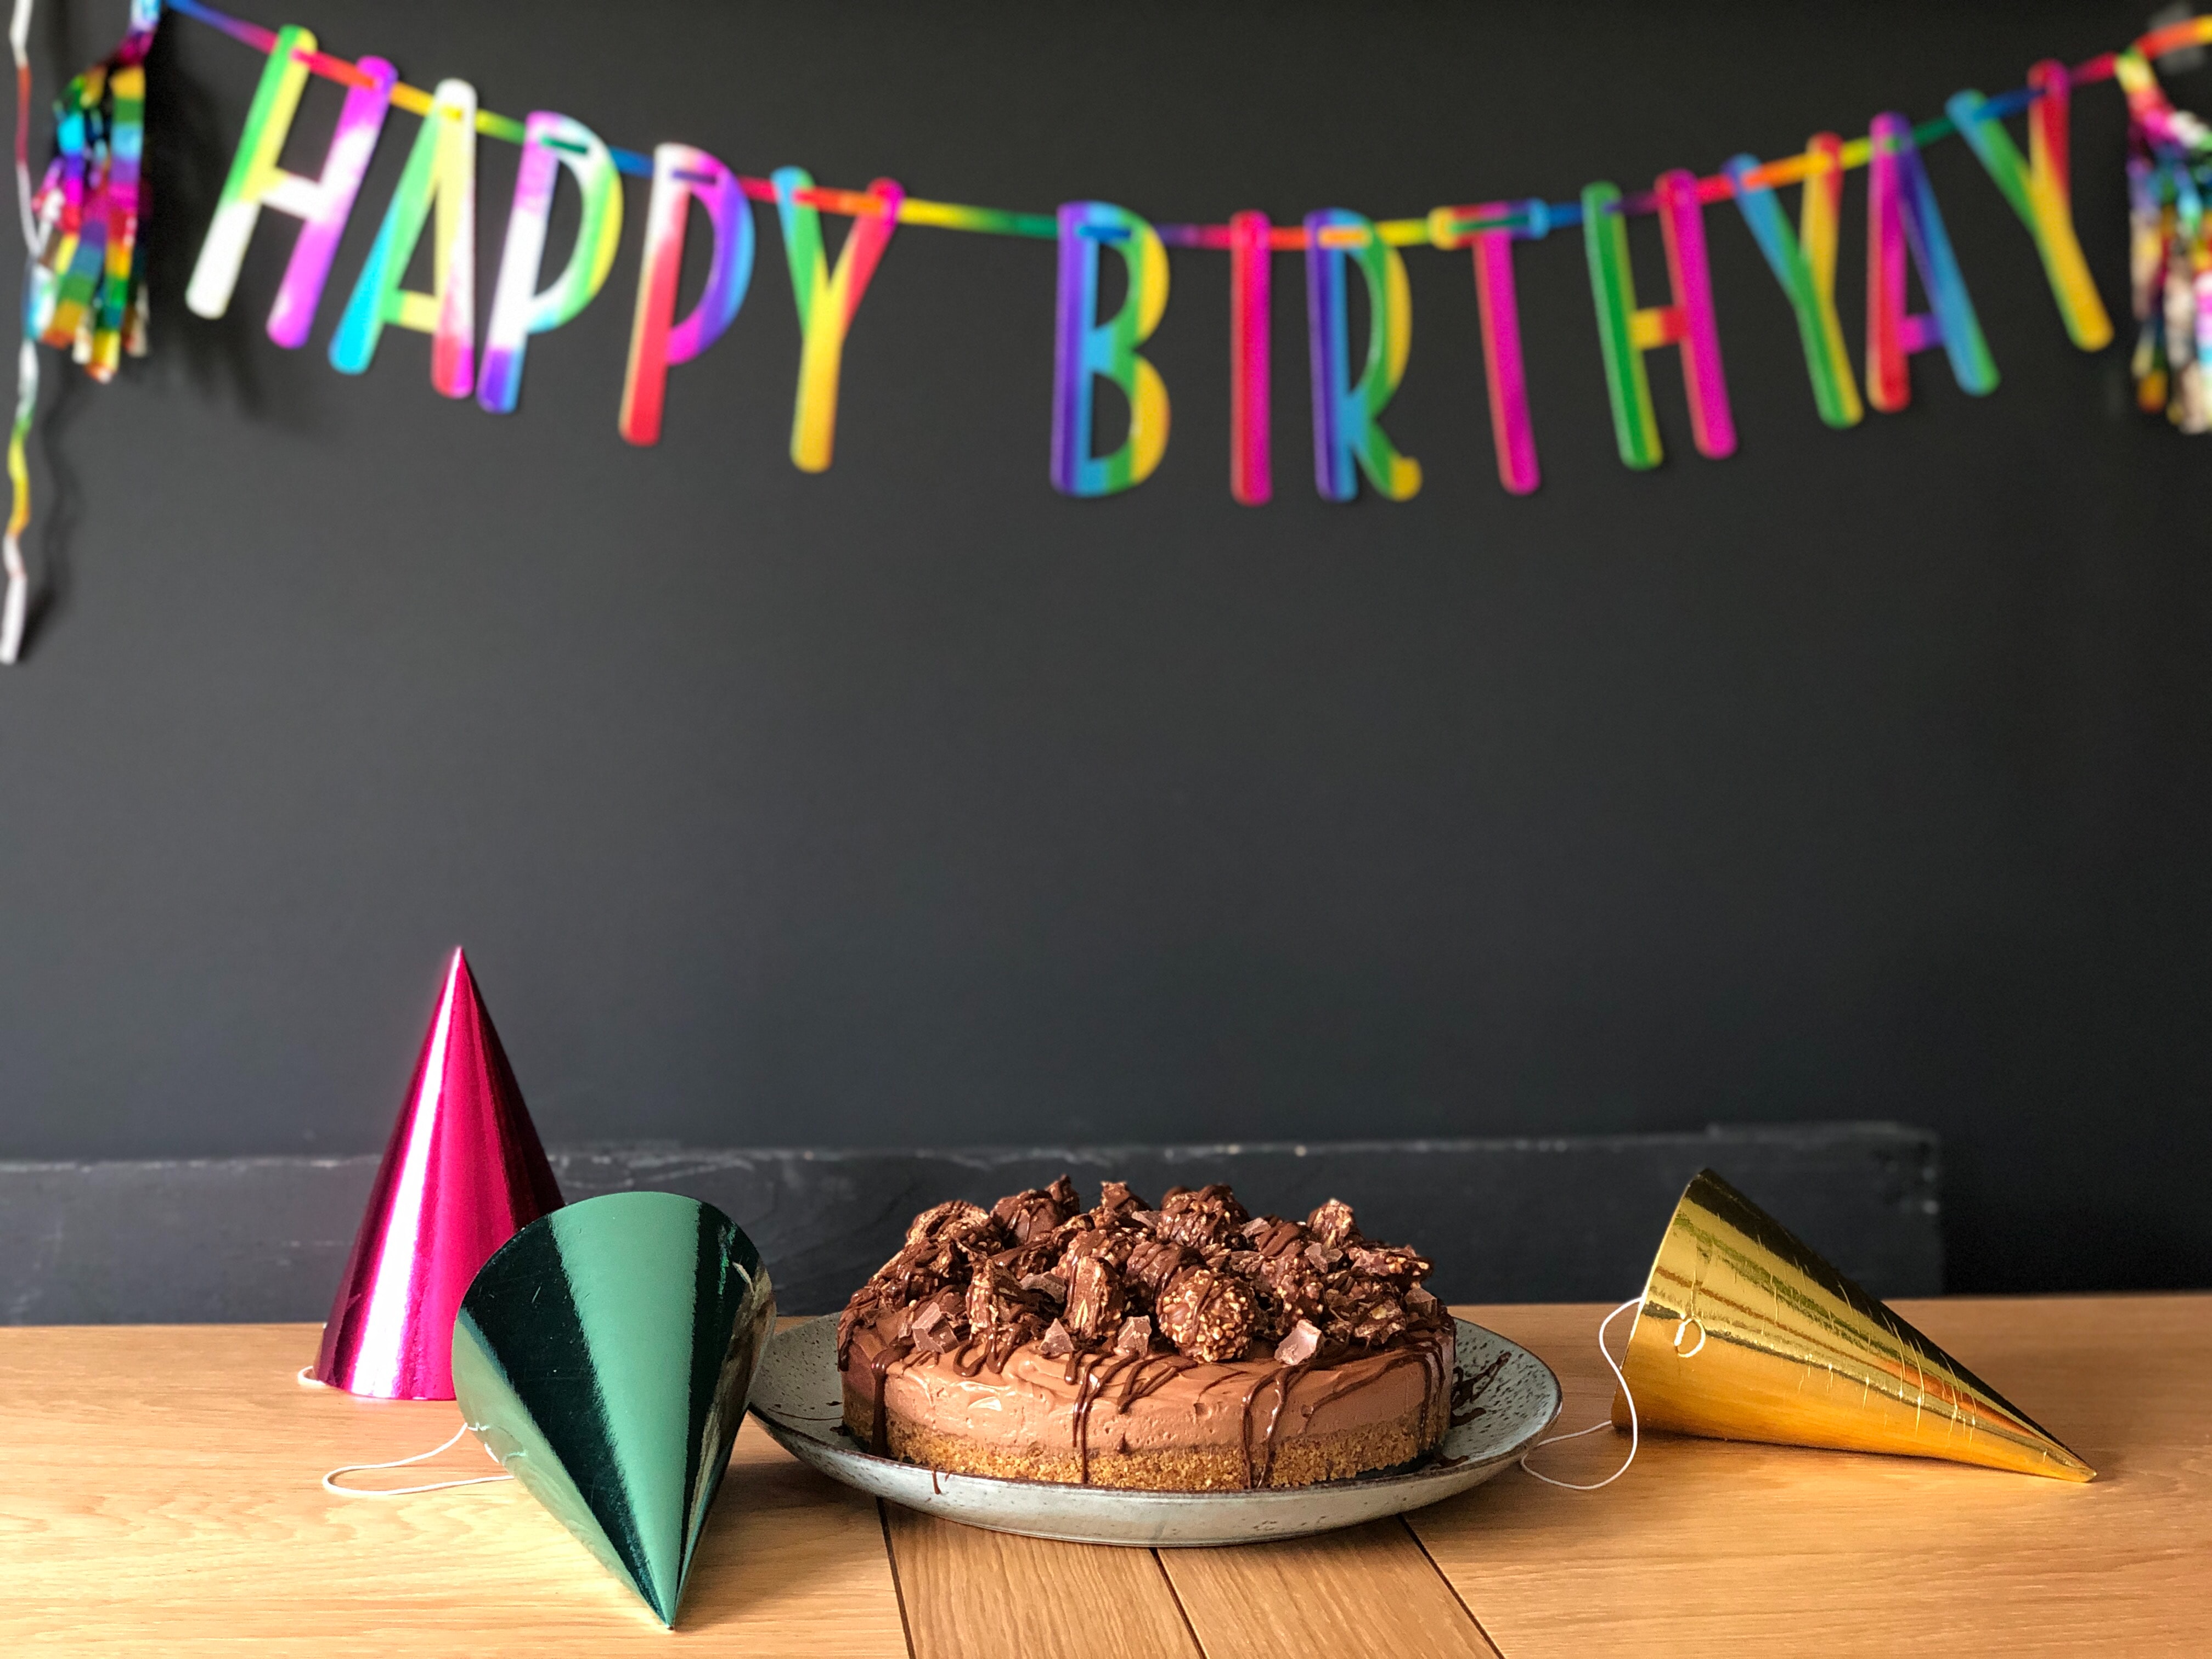 a rainbow banner reads "happy birthday," below this a chocolate cake and three party hats, two of which have fallen over